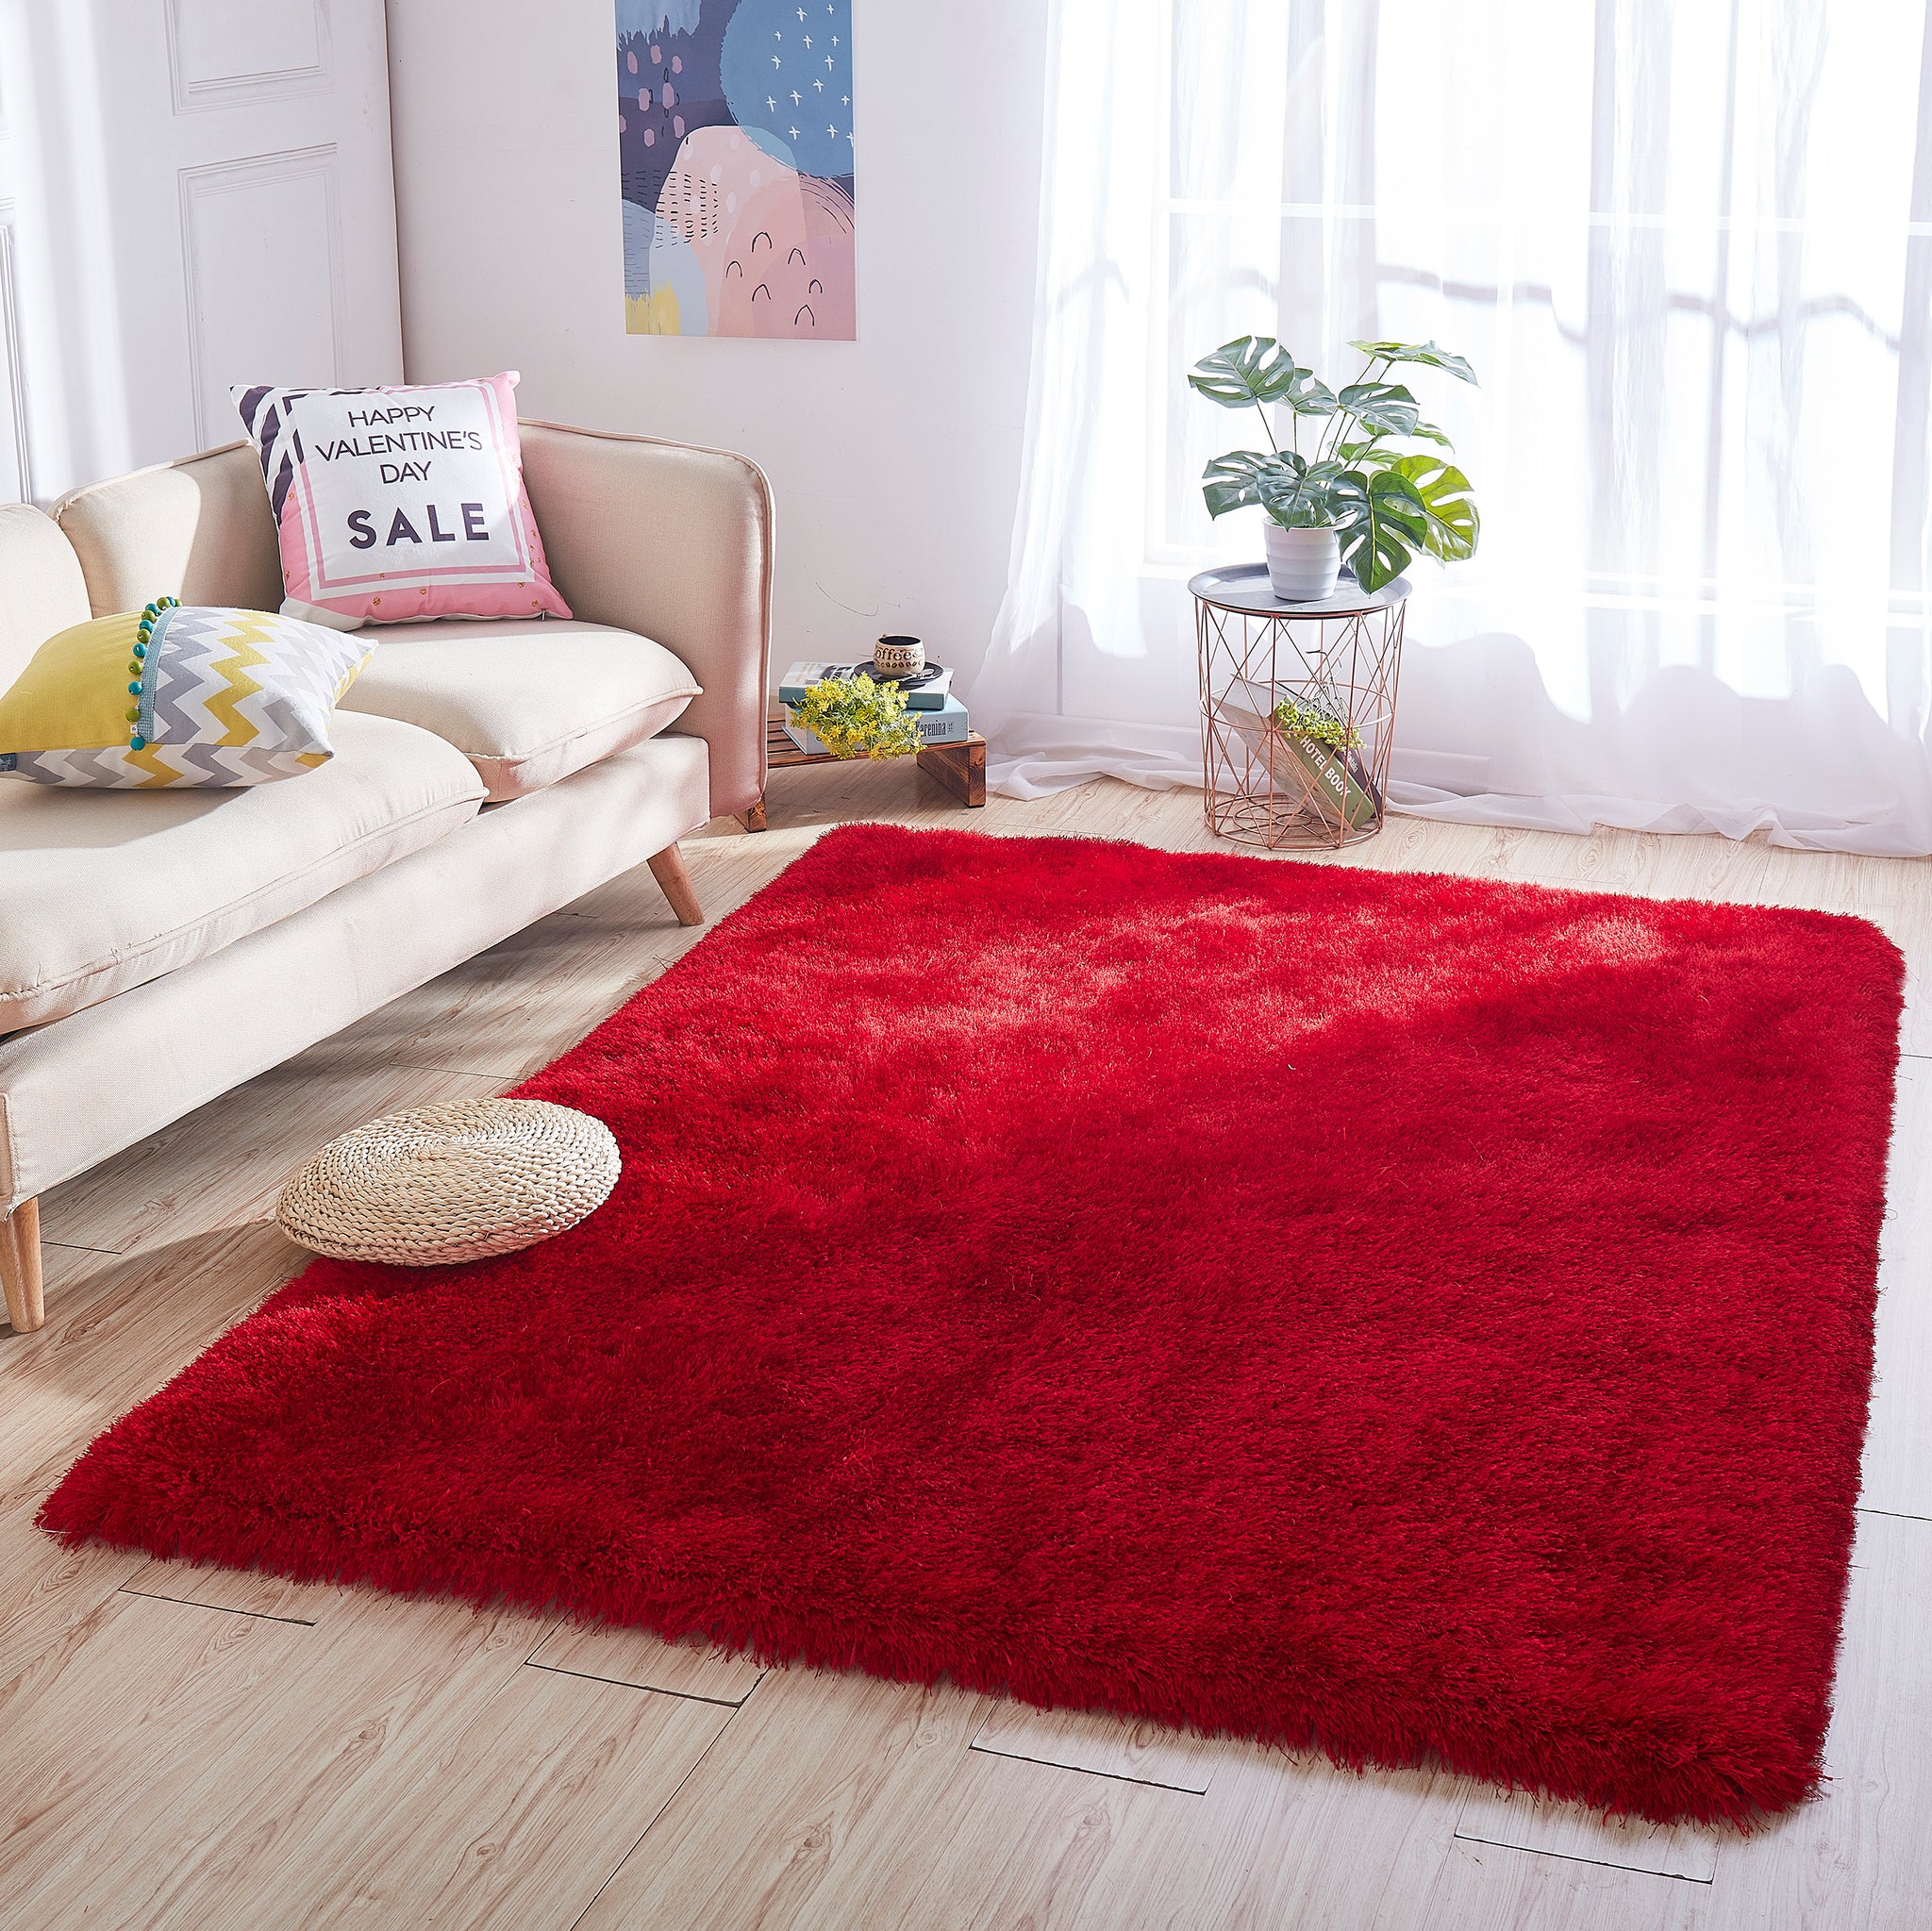 5' x 7' Red Thick Dense Pile Super Soft Living Room Bedroom Shaggy Shag Area Rug